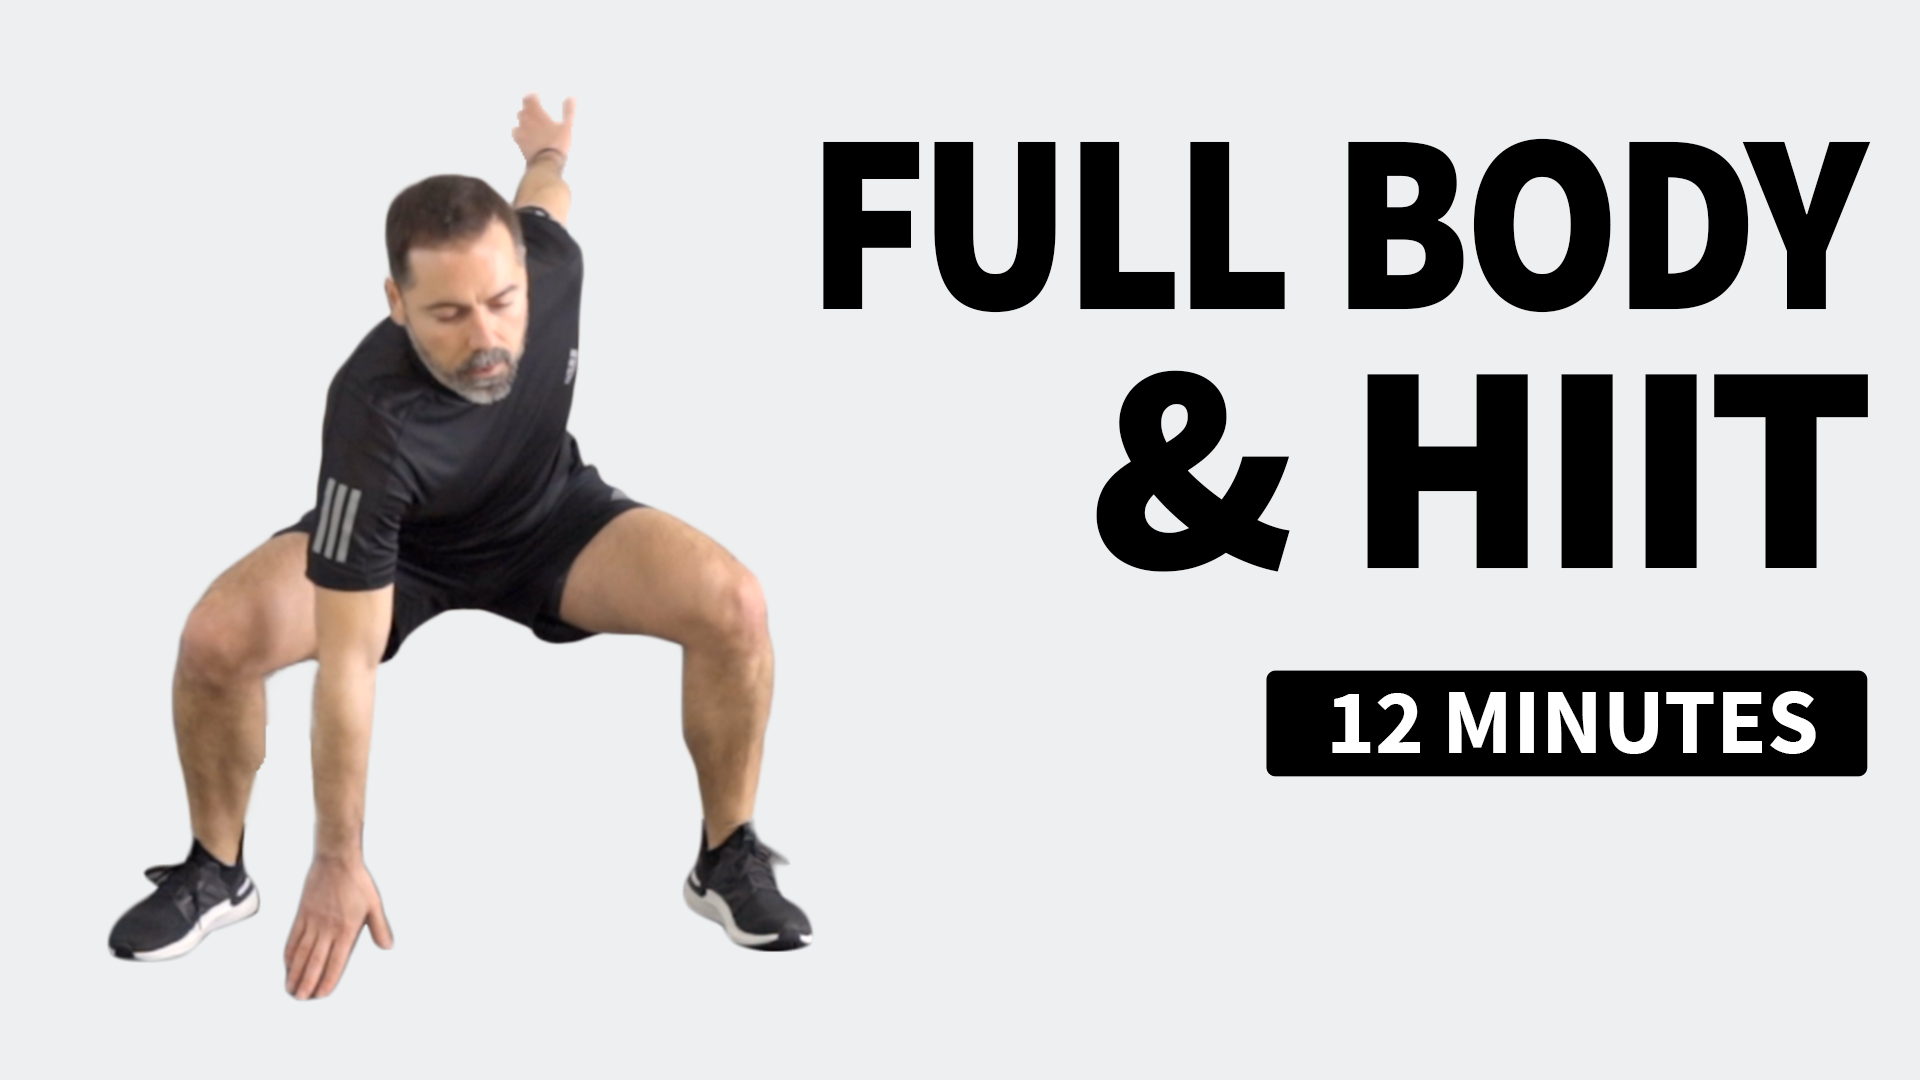 2 in 1 - Full Body & HIIT Workout